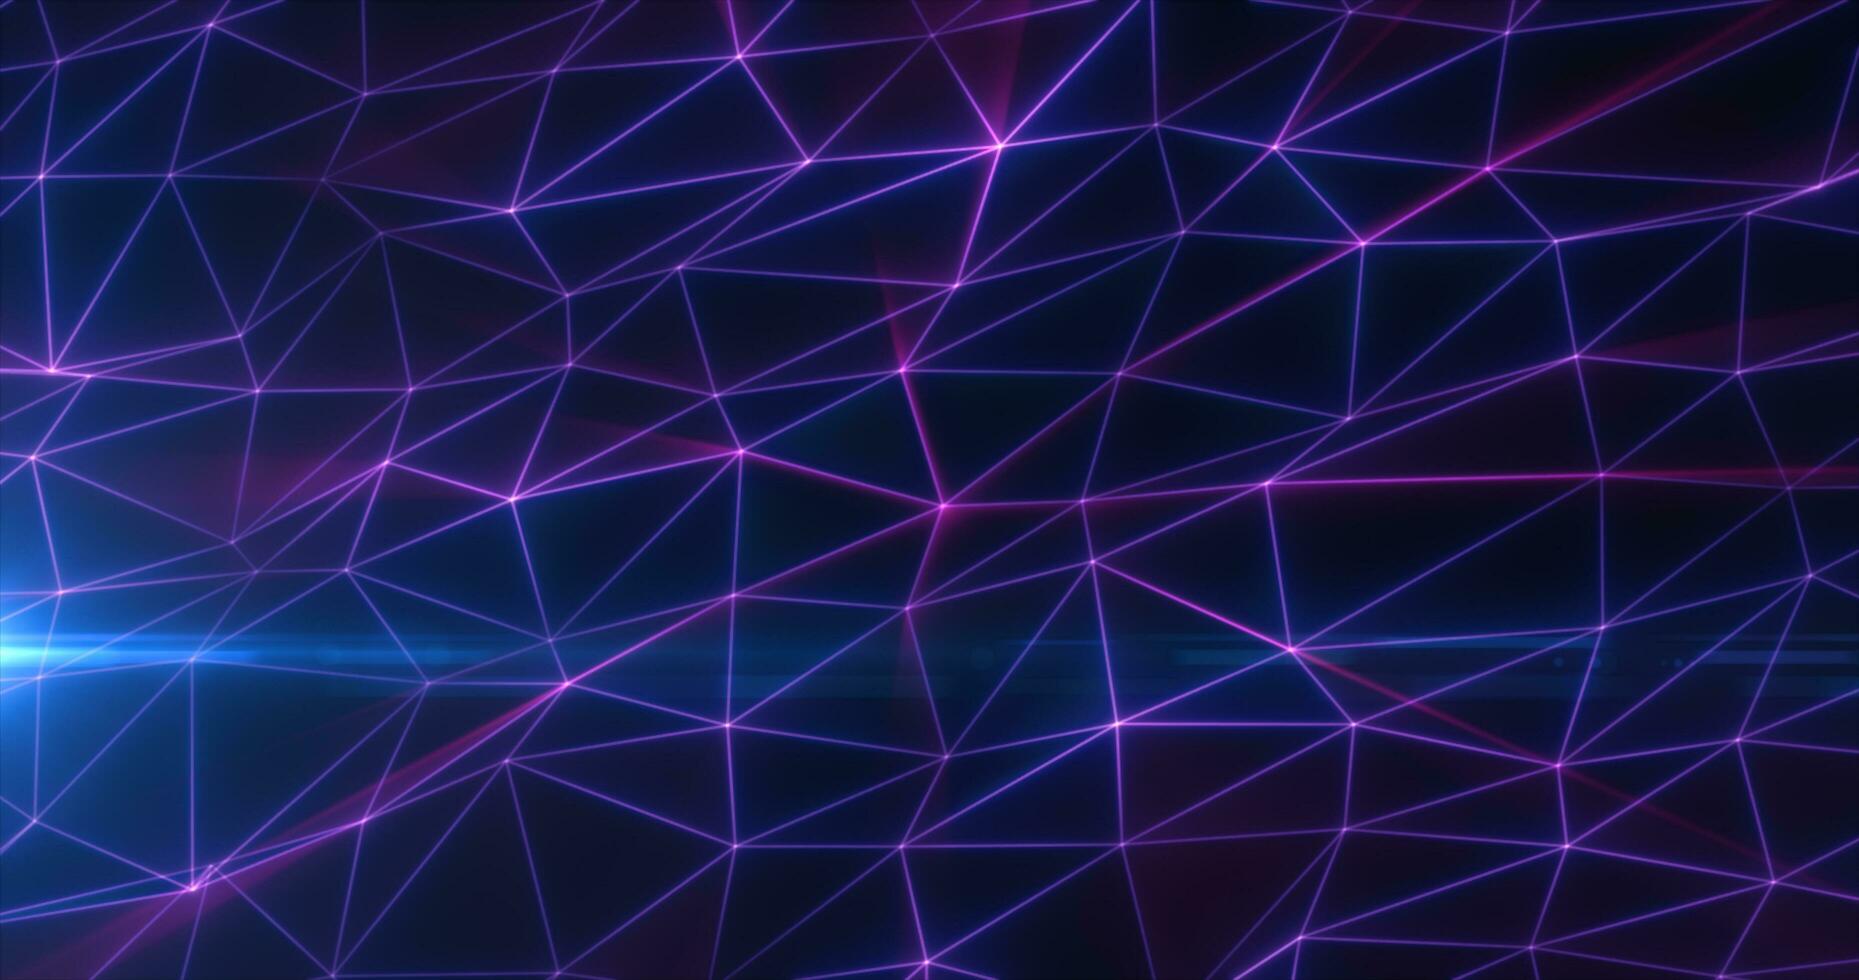 Abstract purple lines and triangles glowing high tech digital energy abstract background photo